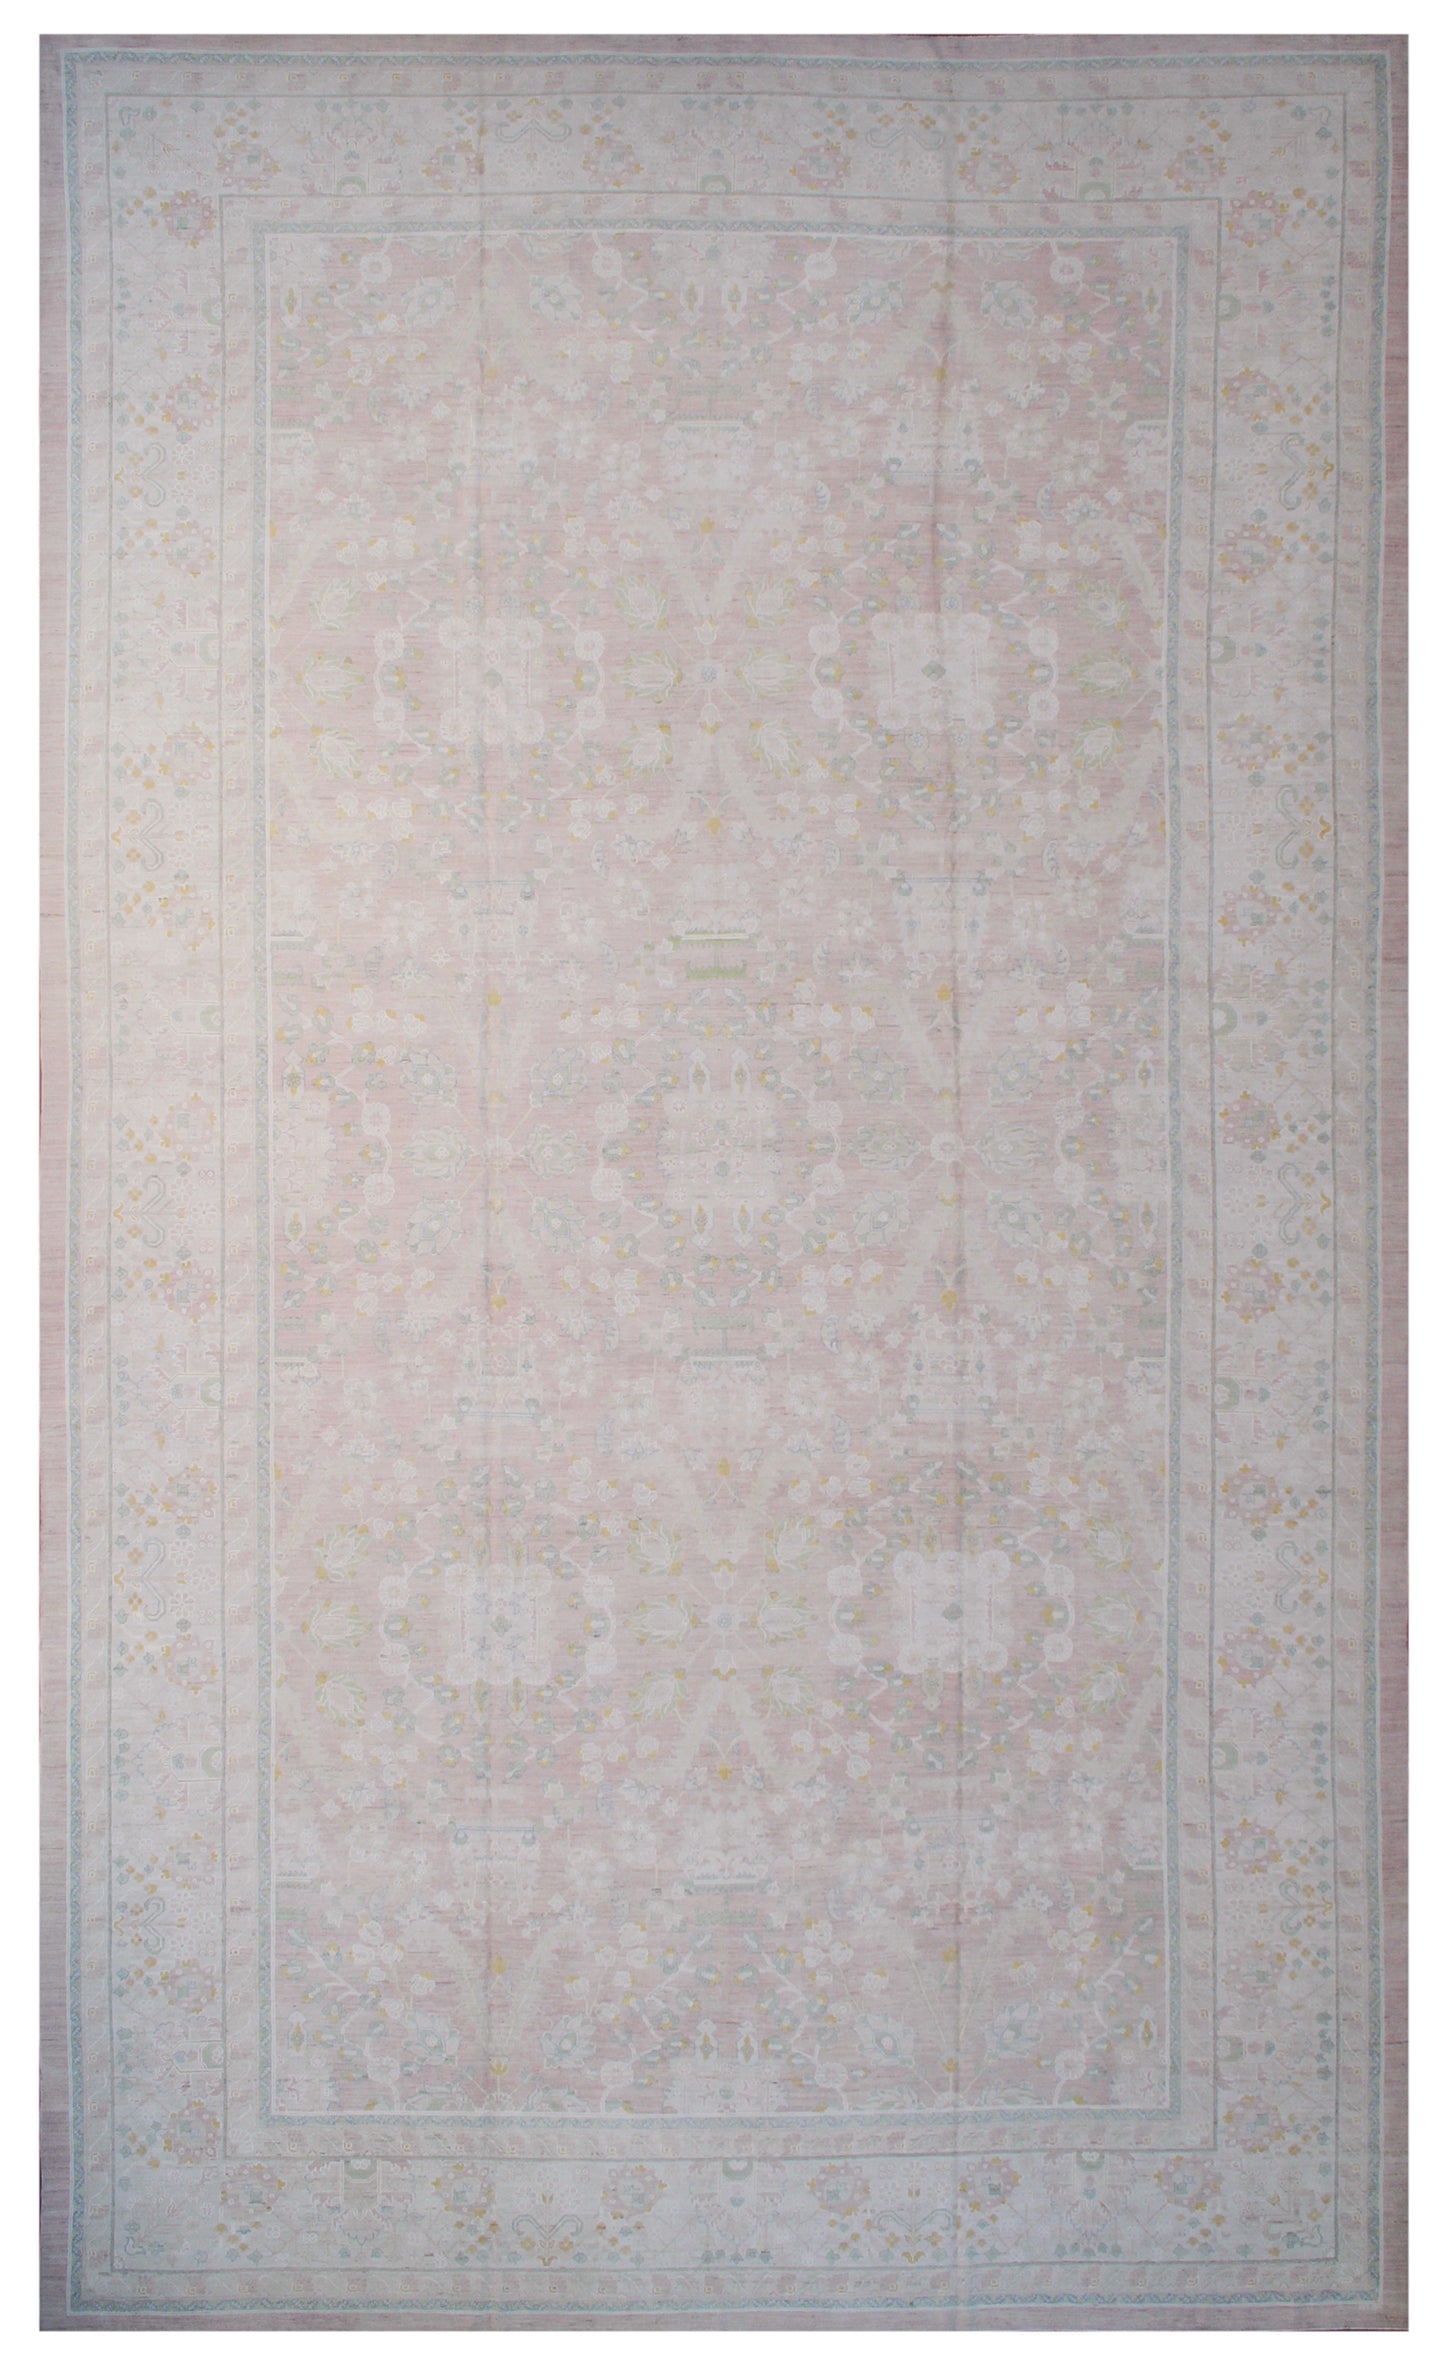 14x24 Large Palace Size Wool and Cotton Ariana Luxury Rug